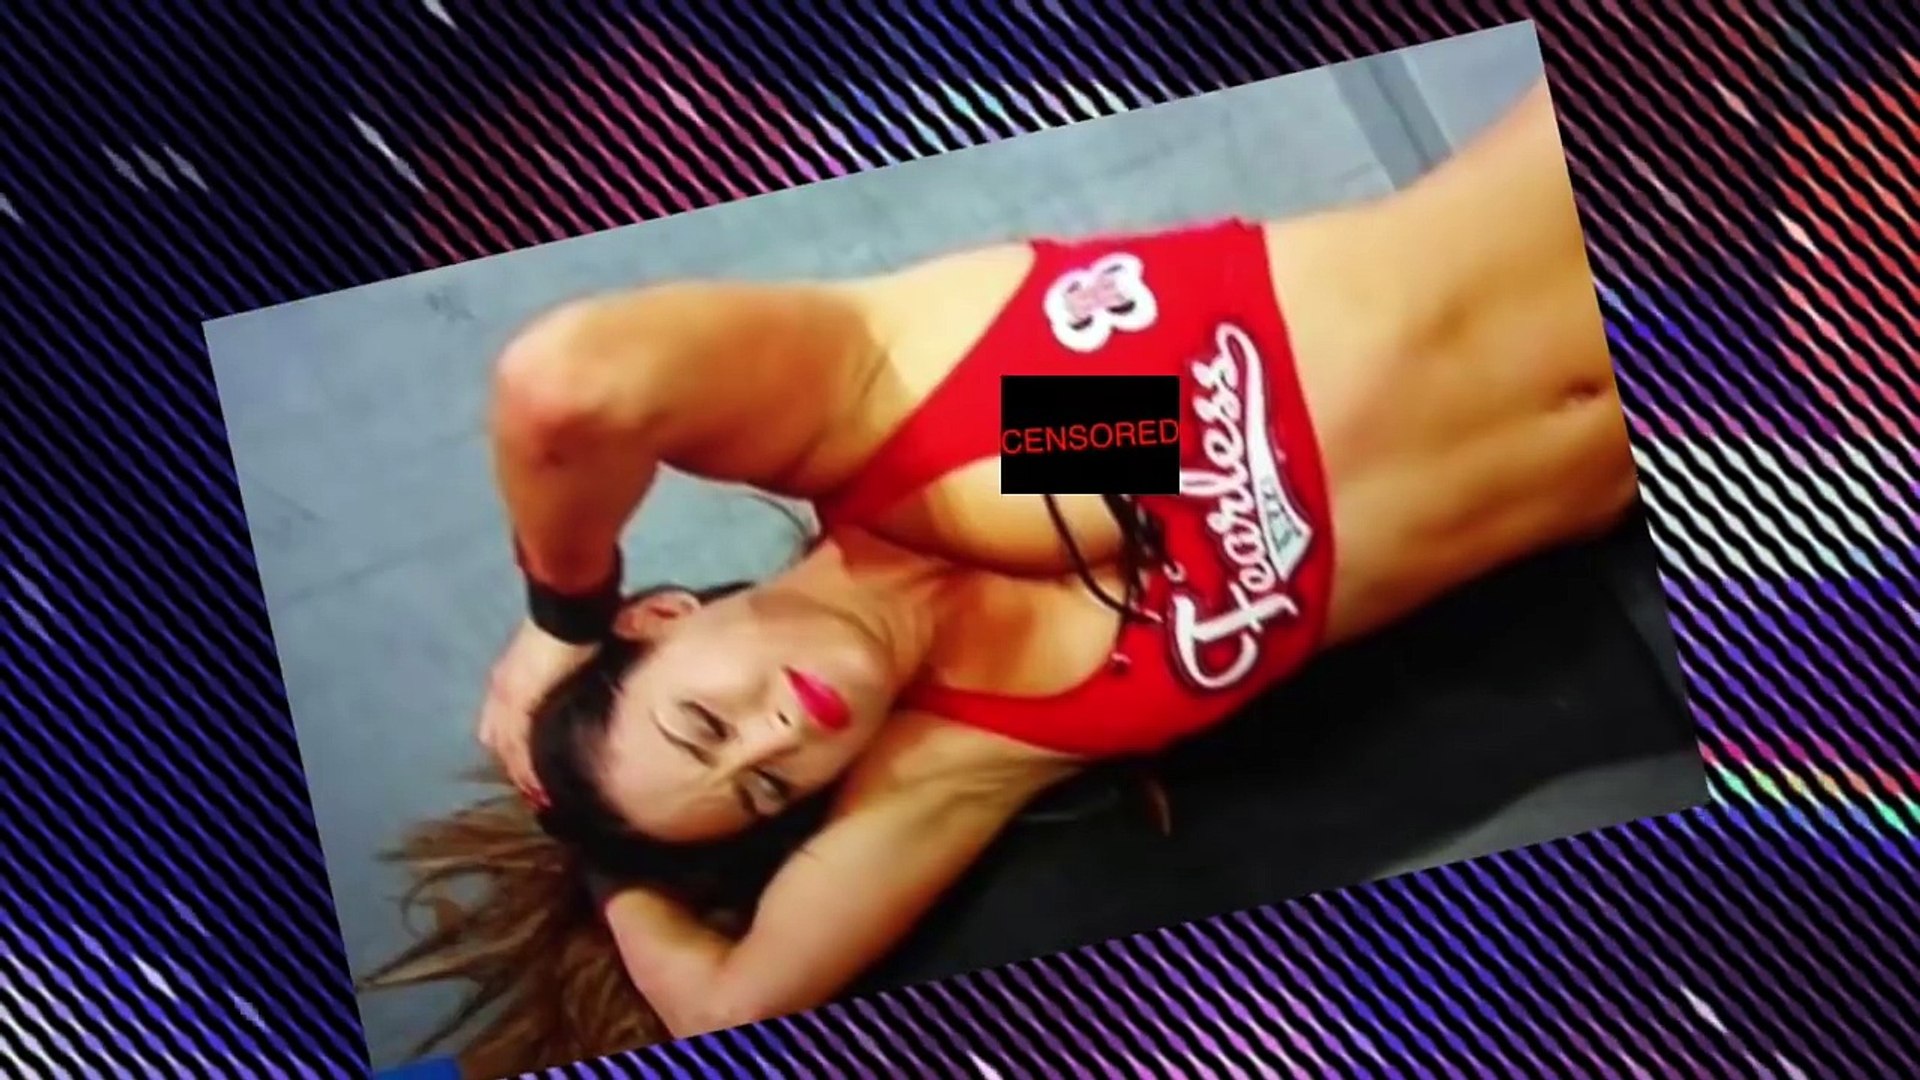 anne dadivas recommends female wrestlers wardrobe malfunctions pic